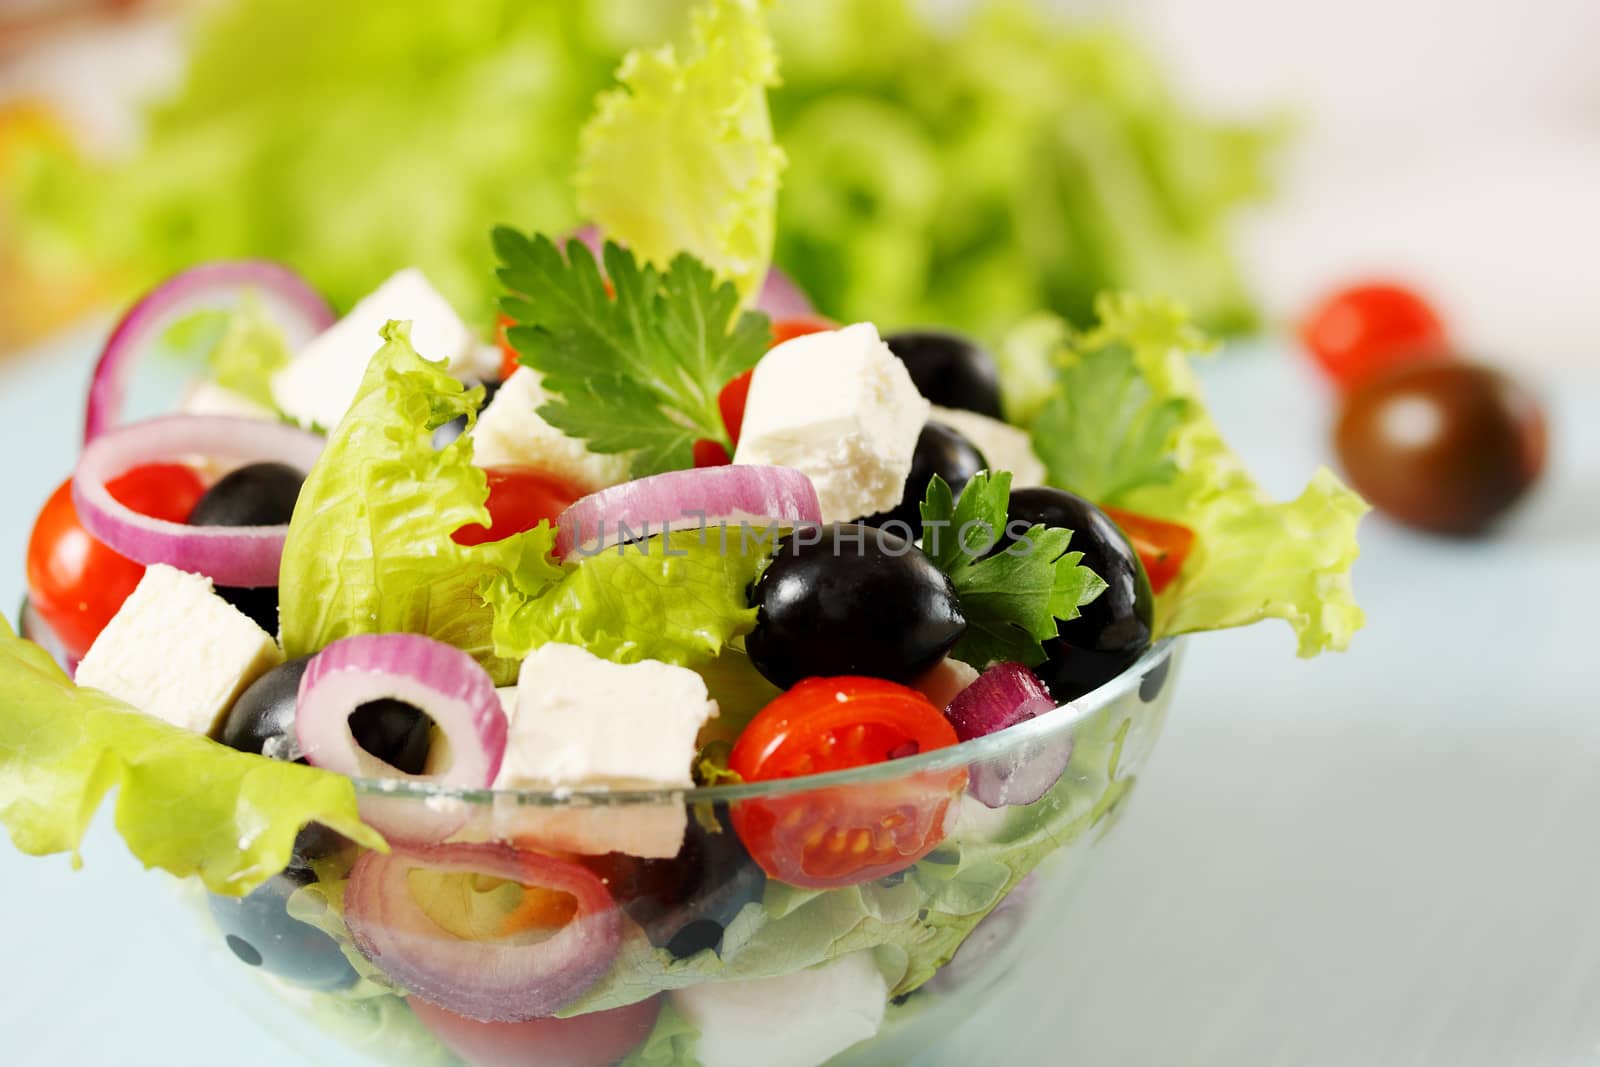 Greek salad with tomatoes olives and cheese